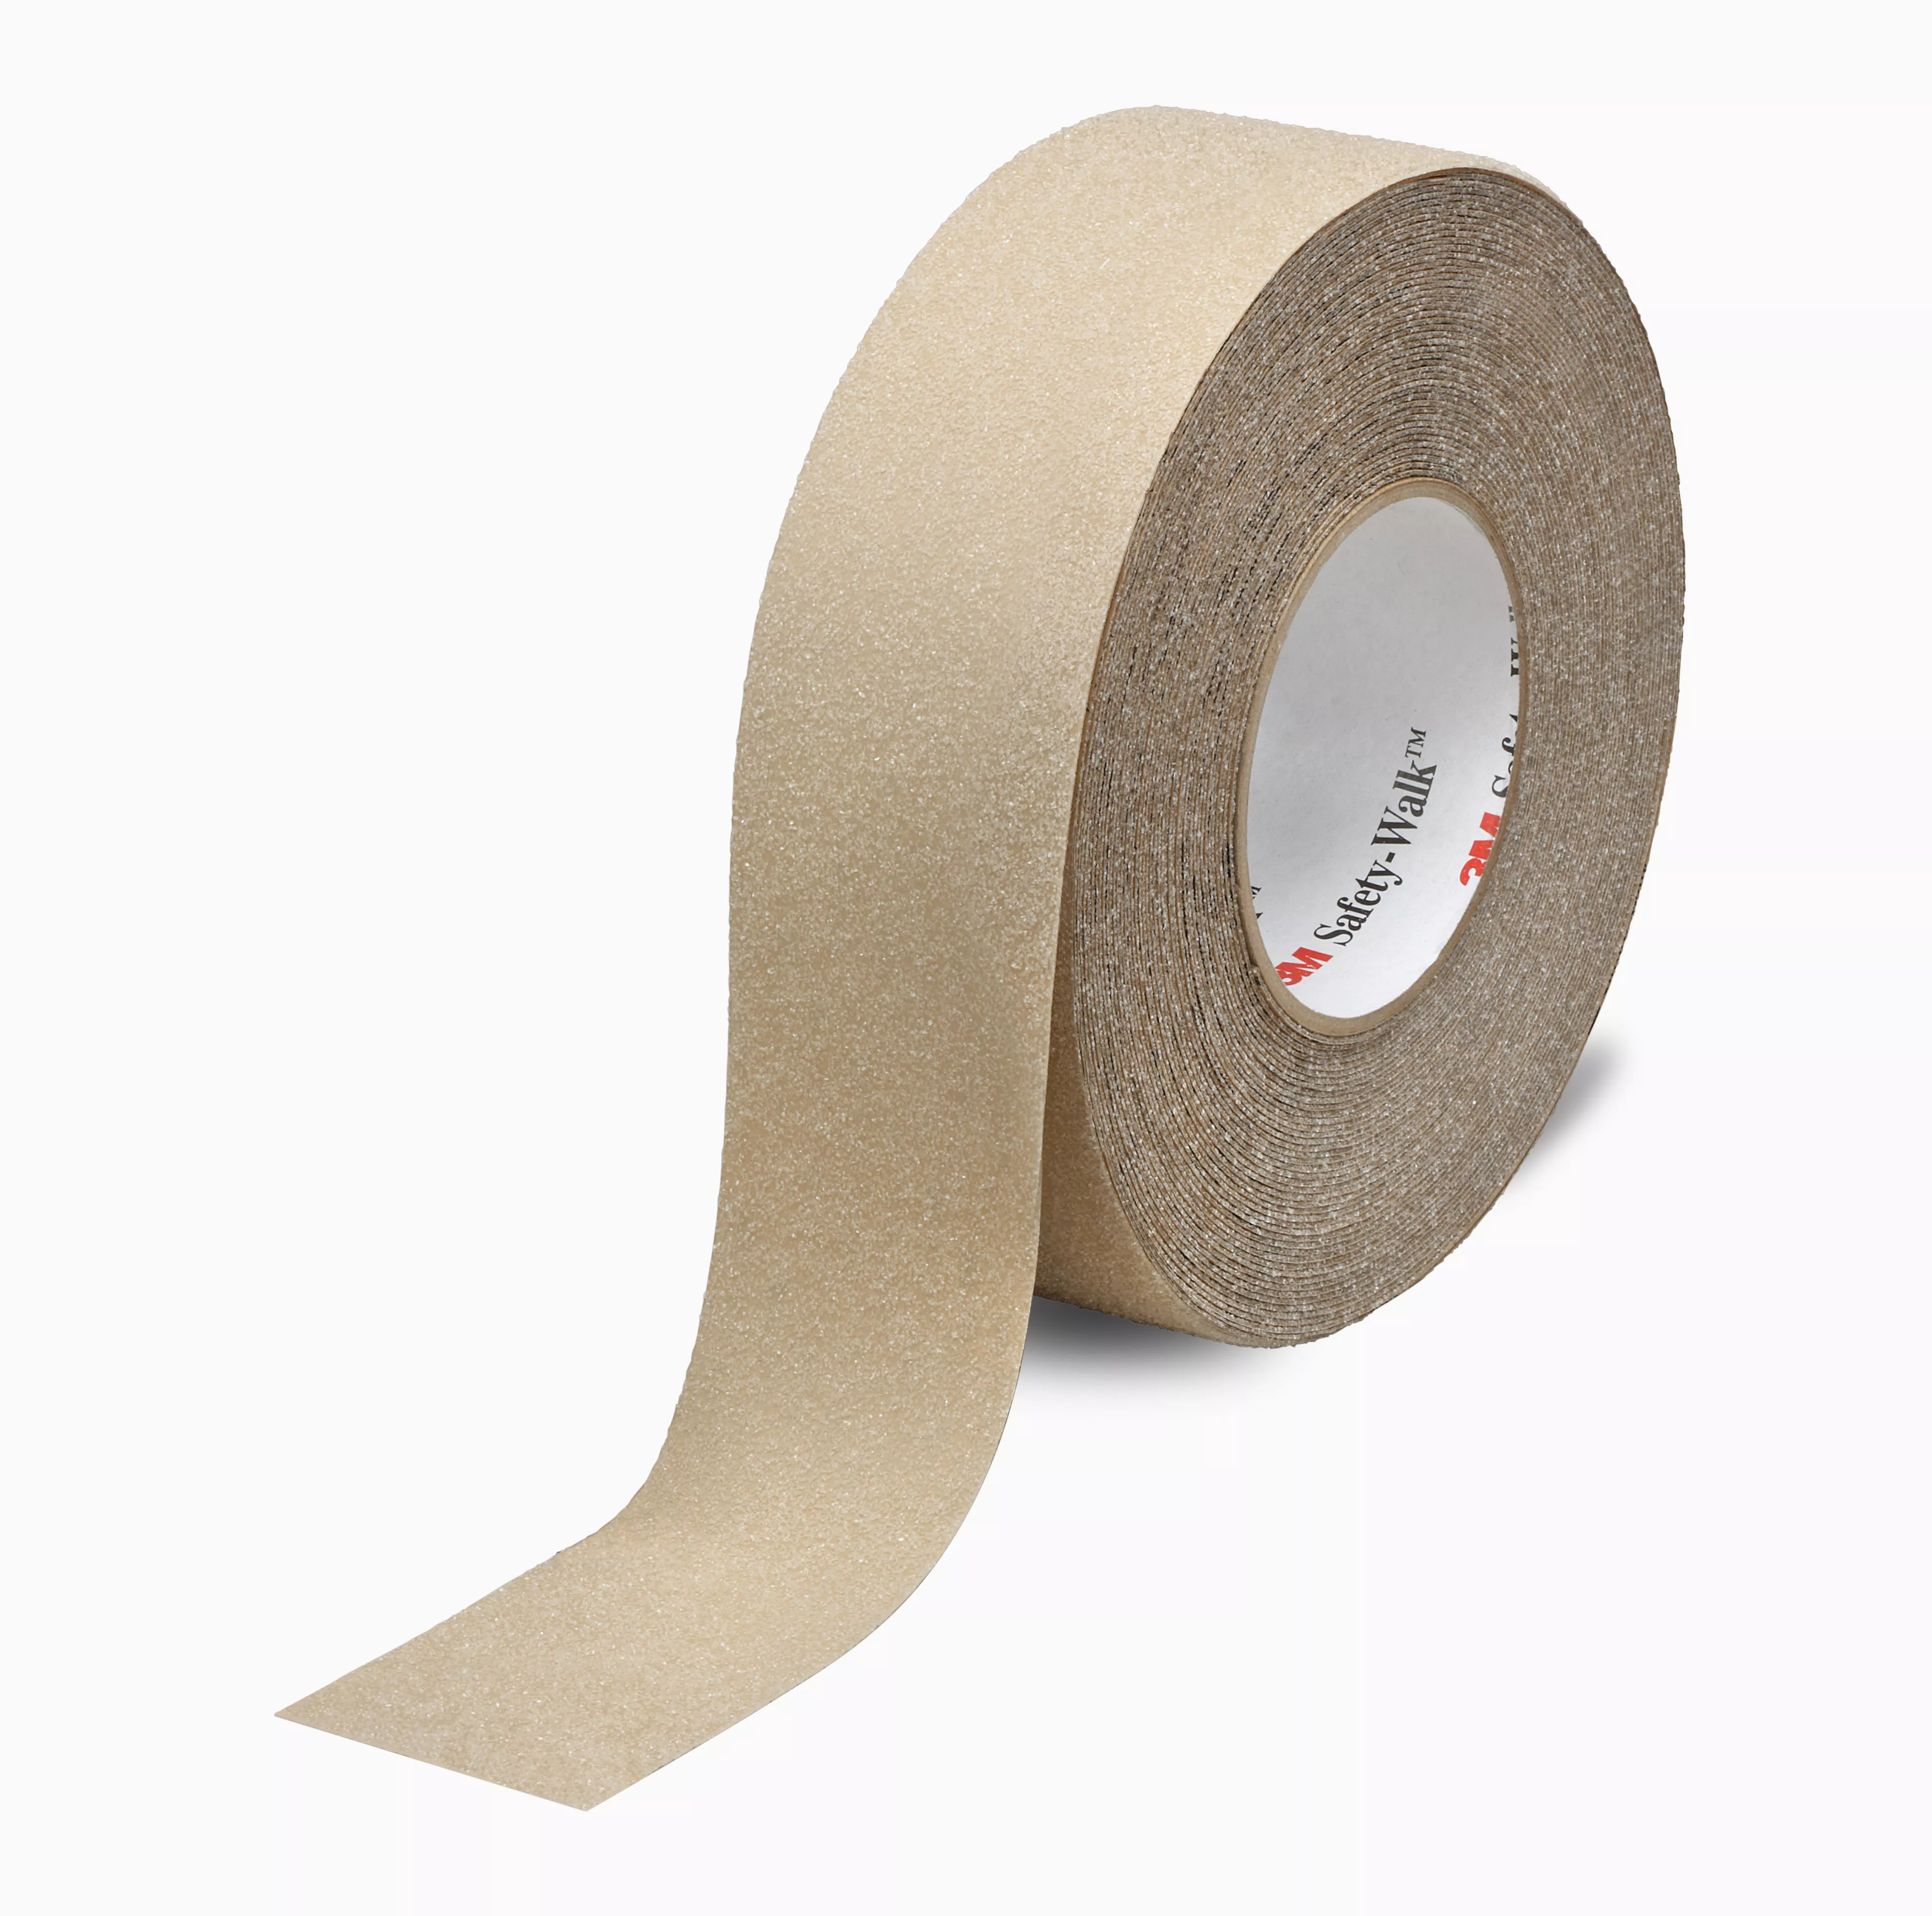 Product Number 620 | 3M™ Safety-Walk™ Slip-Resistant General Purpose Tapes & Treads 620